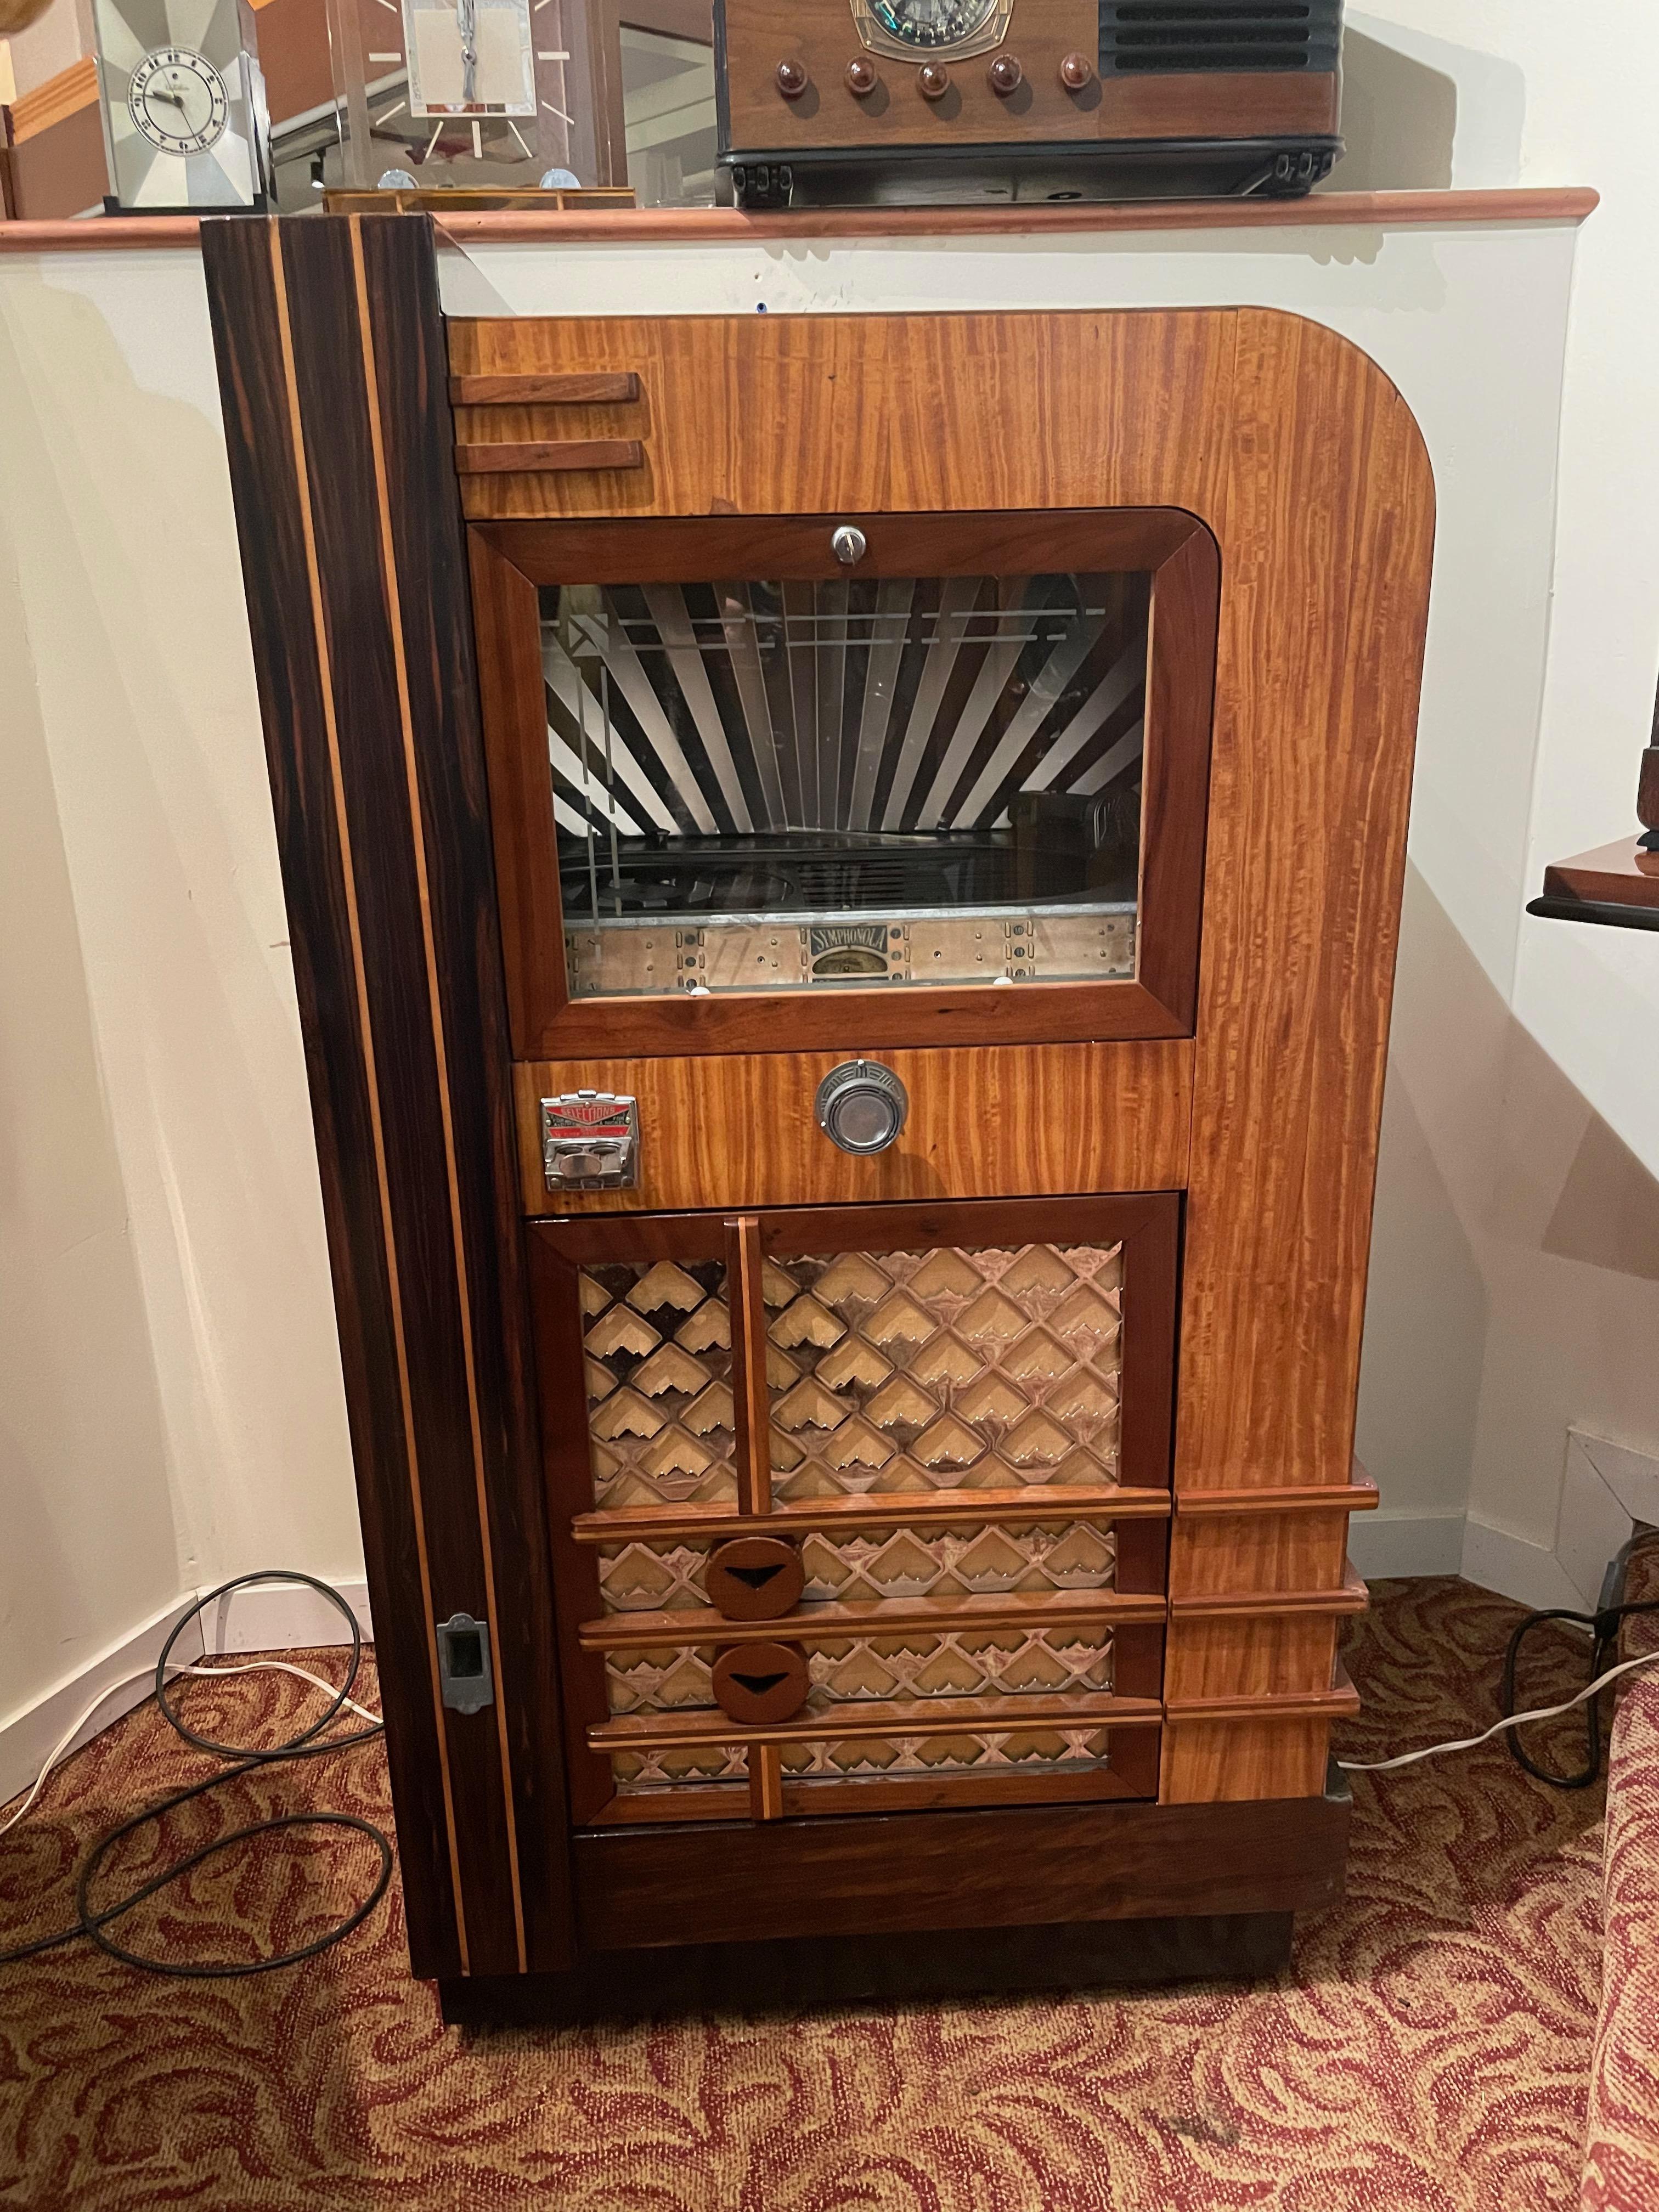 Seeburg Symphonola model C 1936 restored juke box. This is a rare and hard-to-find Modernistic Model which plays 12 78 RPM records. The Model C was considered one of, if not The most Art Deco Box ever manufactured. Not much is known about these